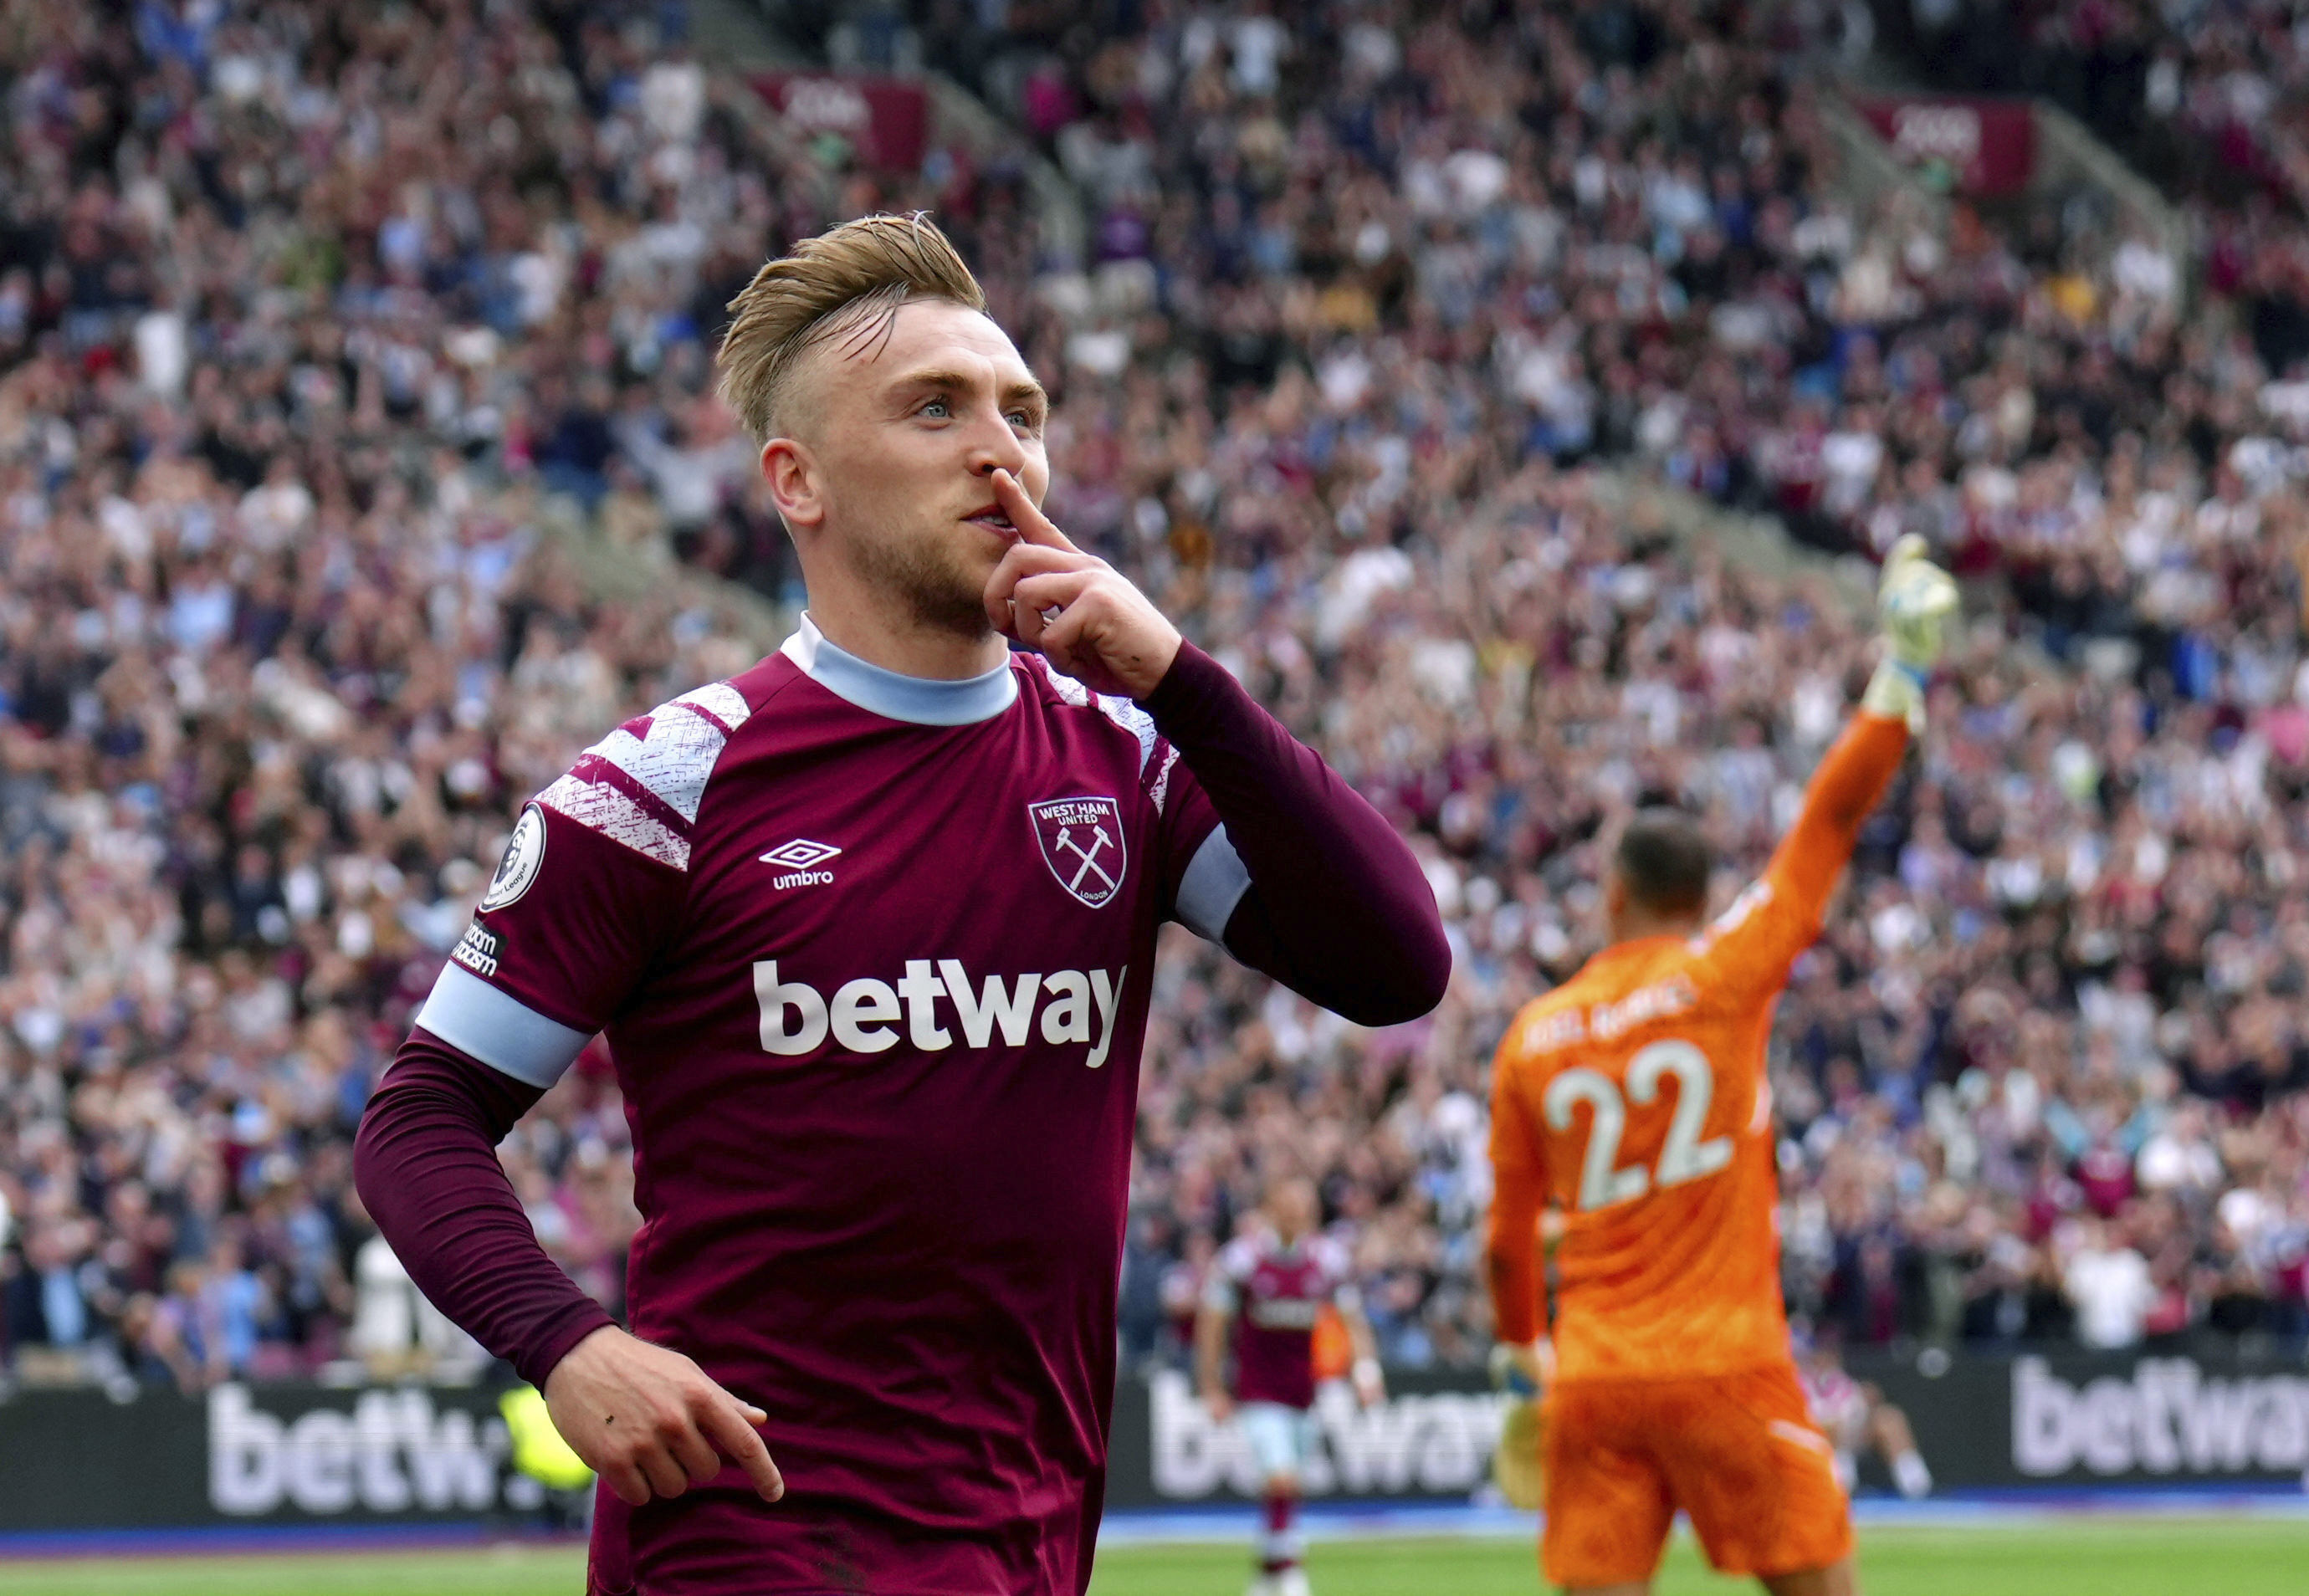 Tottenham vs West Ham Live stream, start time, TV, how to watch for free